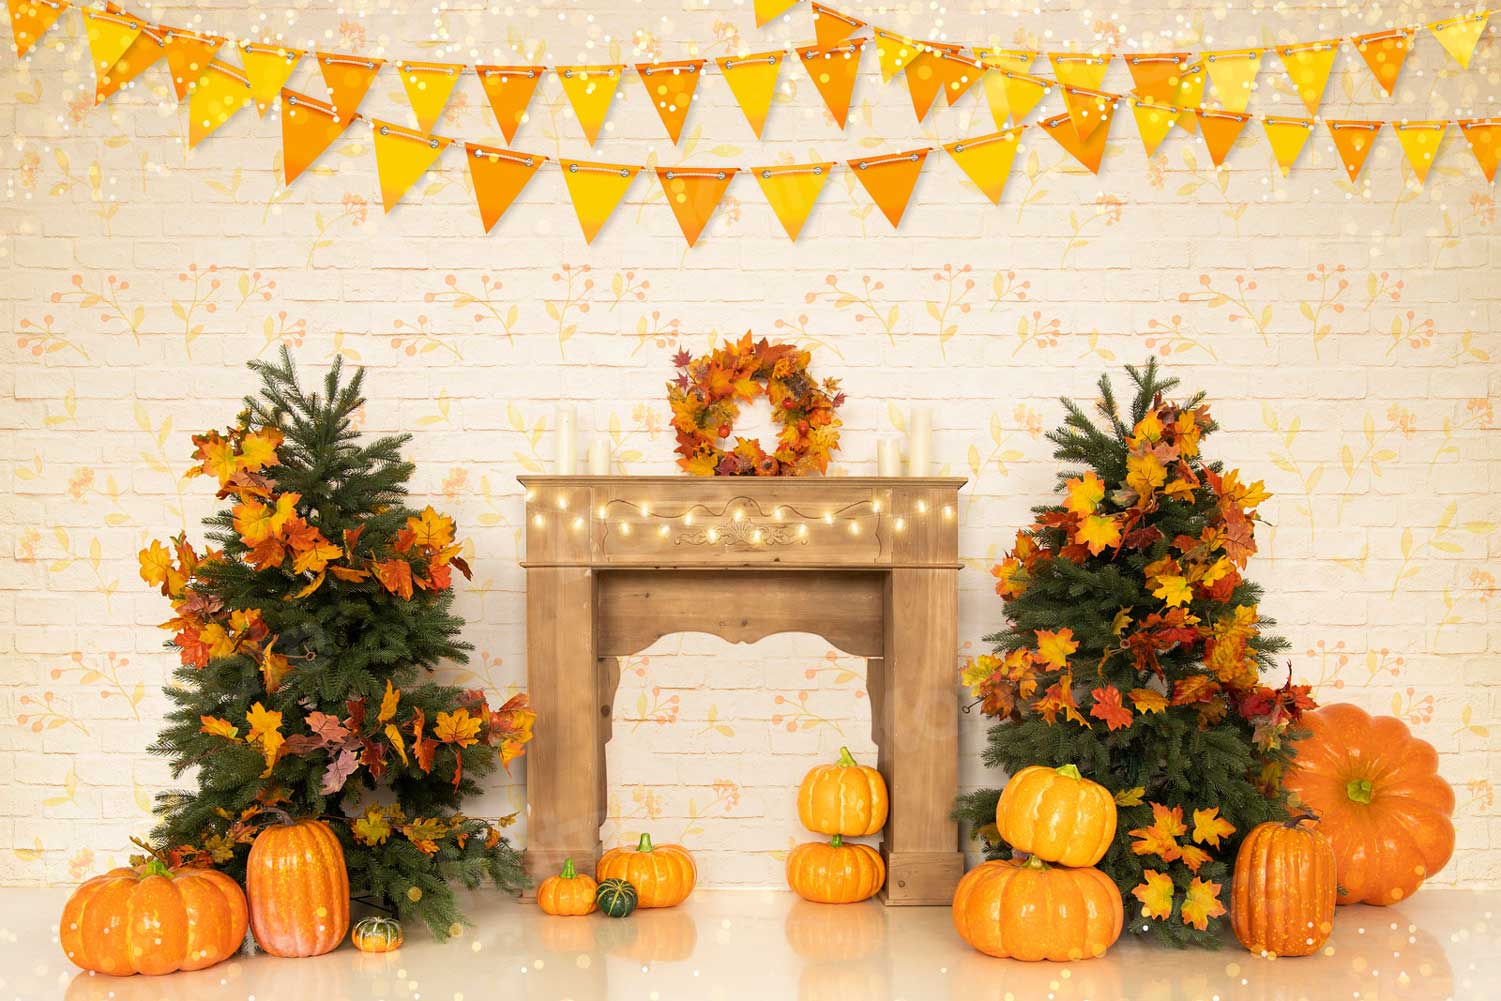 Kate Fall Pumpkin Backdrop Wreath Trees for Photography